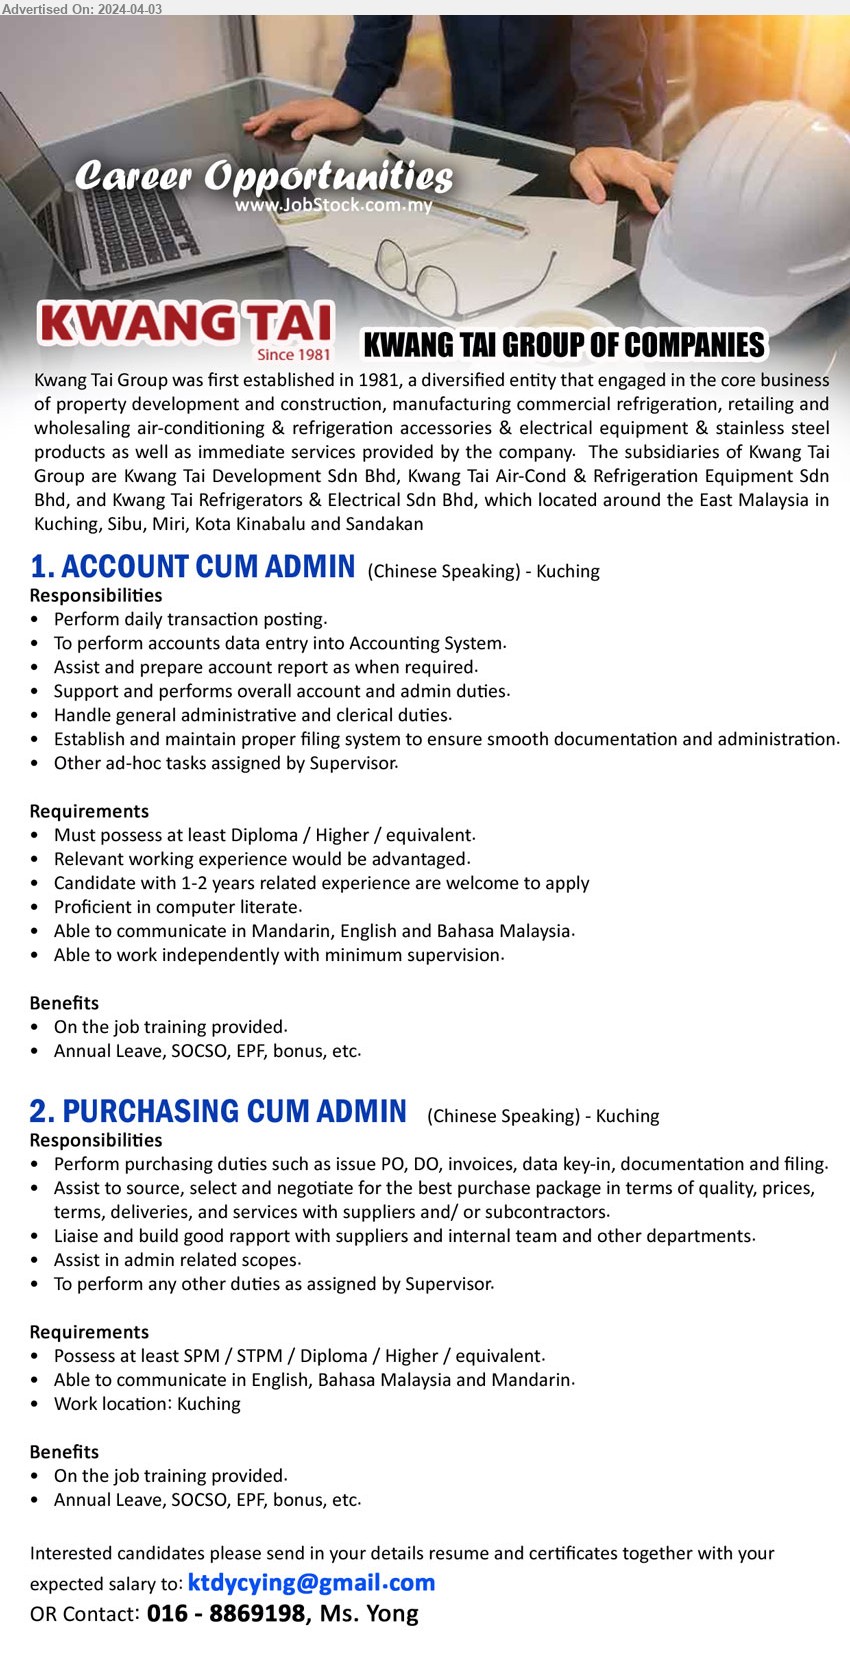 KWANG TAI GROUP - 1. ACCOUNT CUM ADMIN  (Kuching),  Diploma / Higher, 1-2 yrs. exp., Proficient in computer literate.,...
2. PURCHASING CUM ADMIN (Kuching), SPM / STPM / Diploma / Higher, Able to communicate in English, Bahasa Malaysia and Mandarin.,...
Contact: 016-8869198 / Email resume to ...